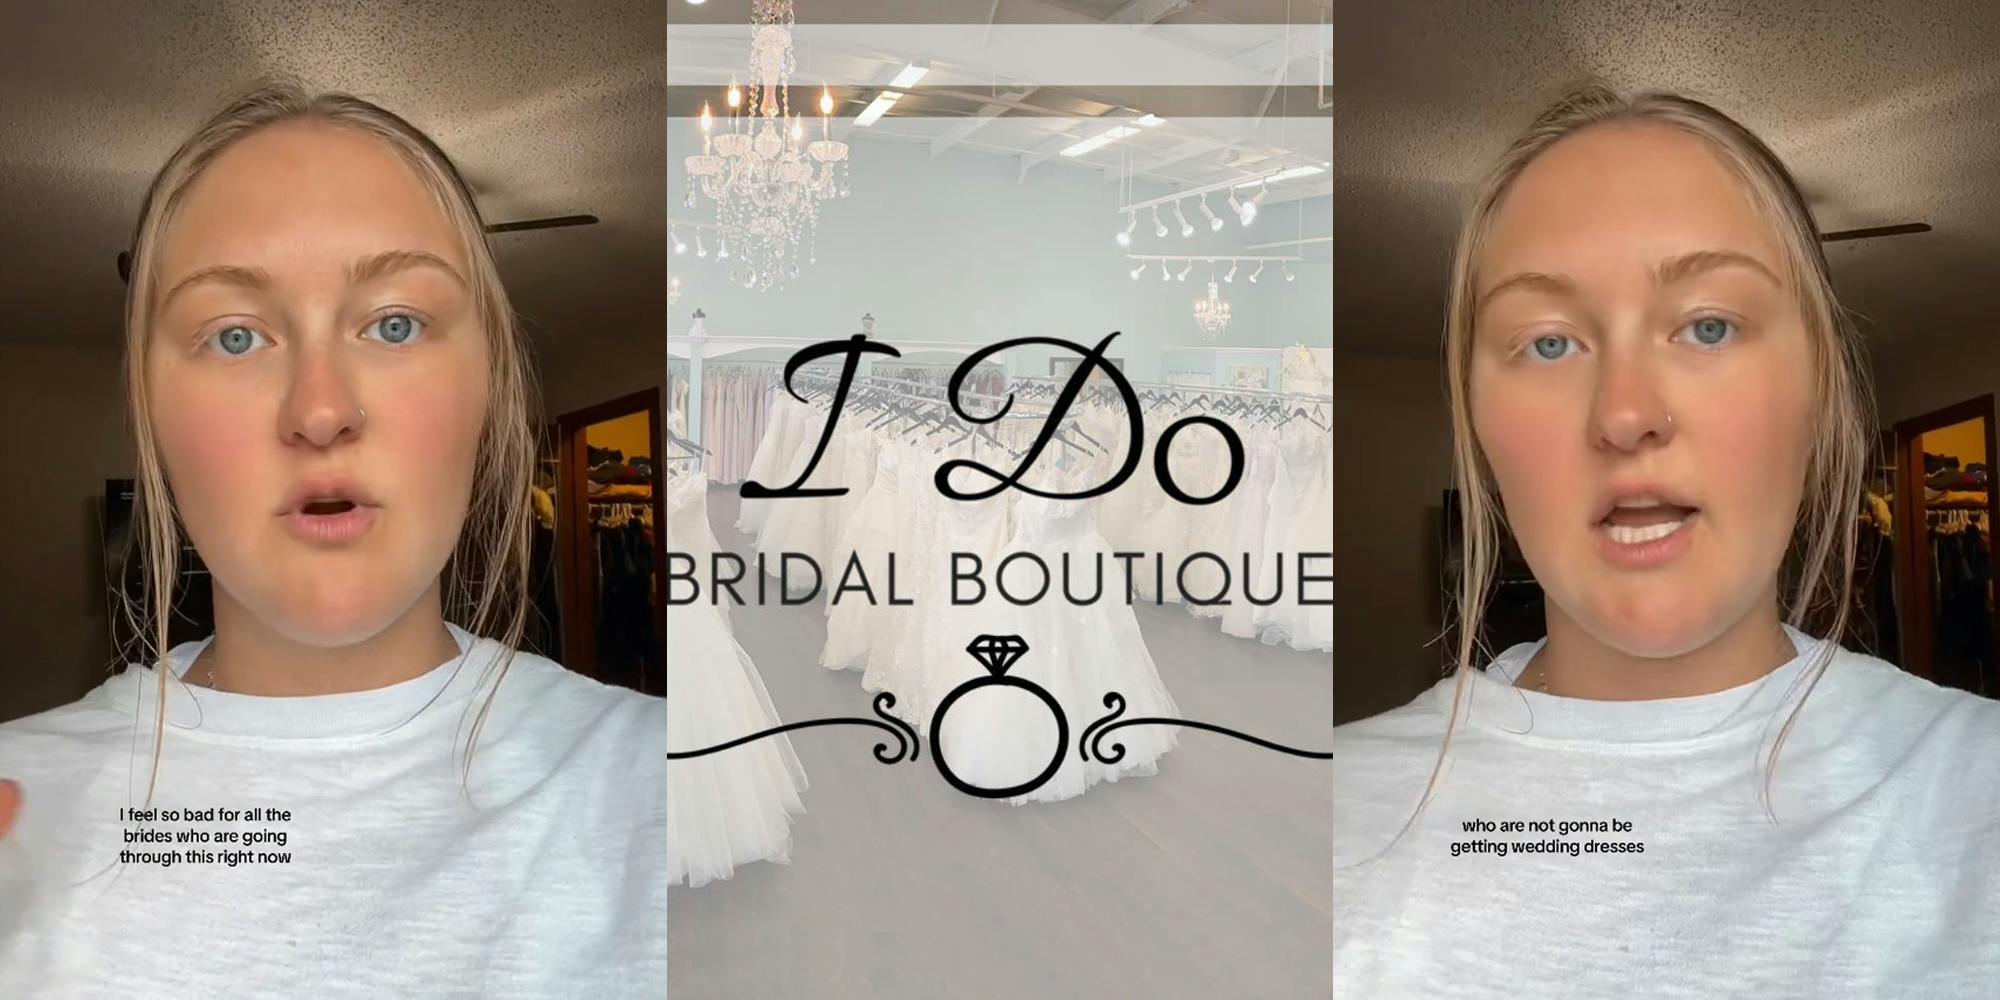 I Do Bridal Boutique customer speaking with caption "I feel so bad for the brides who are going through this right now" (l) I Do Bridal Boutique logo in front of dressing hung in store (c) I Do Bridal Boutique customer speaking with caption "who are not gonna be getting wedding dresses" (r)